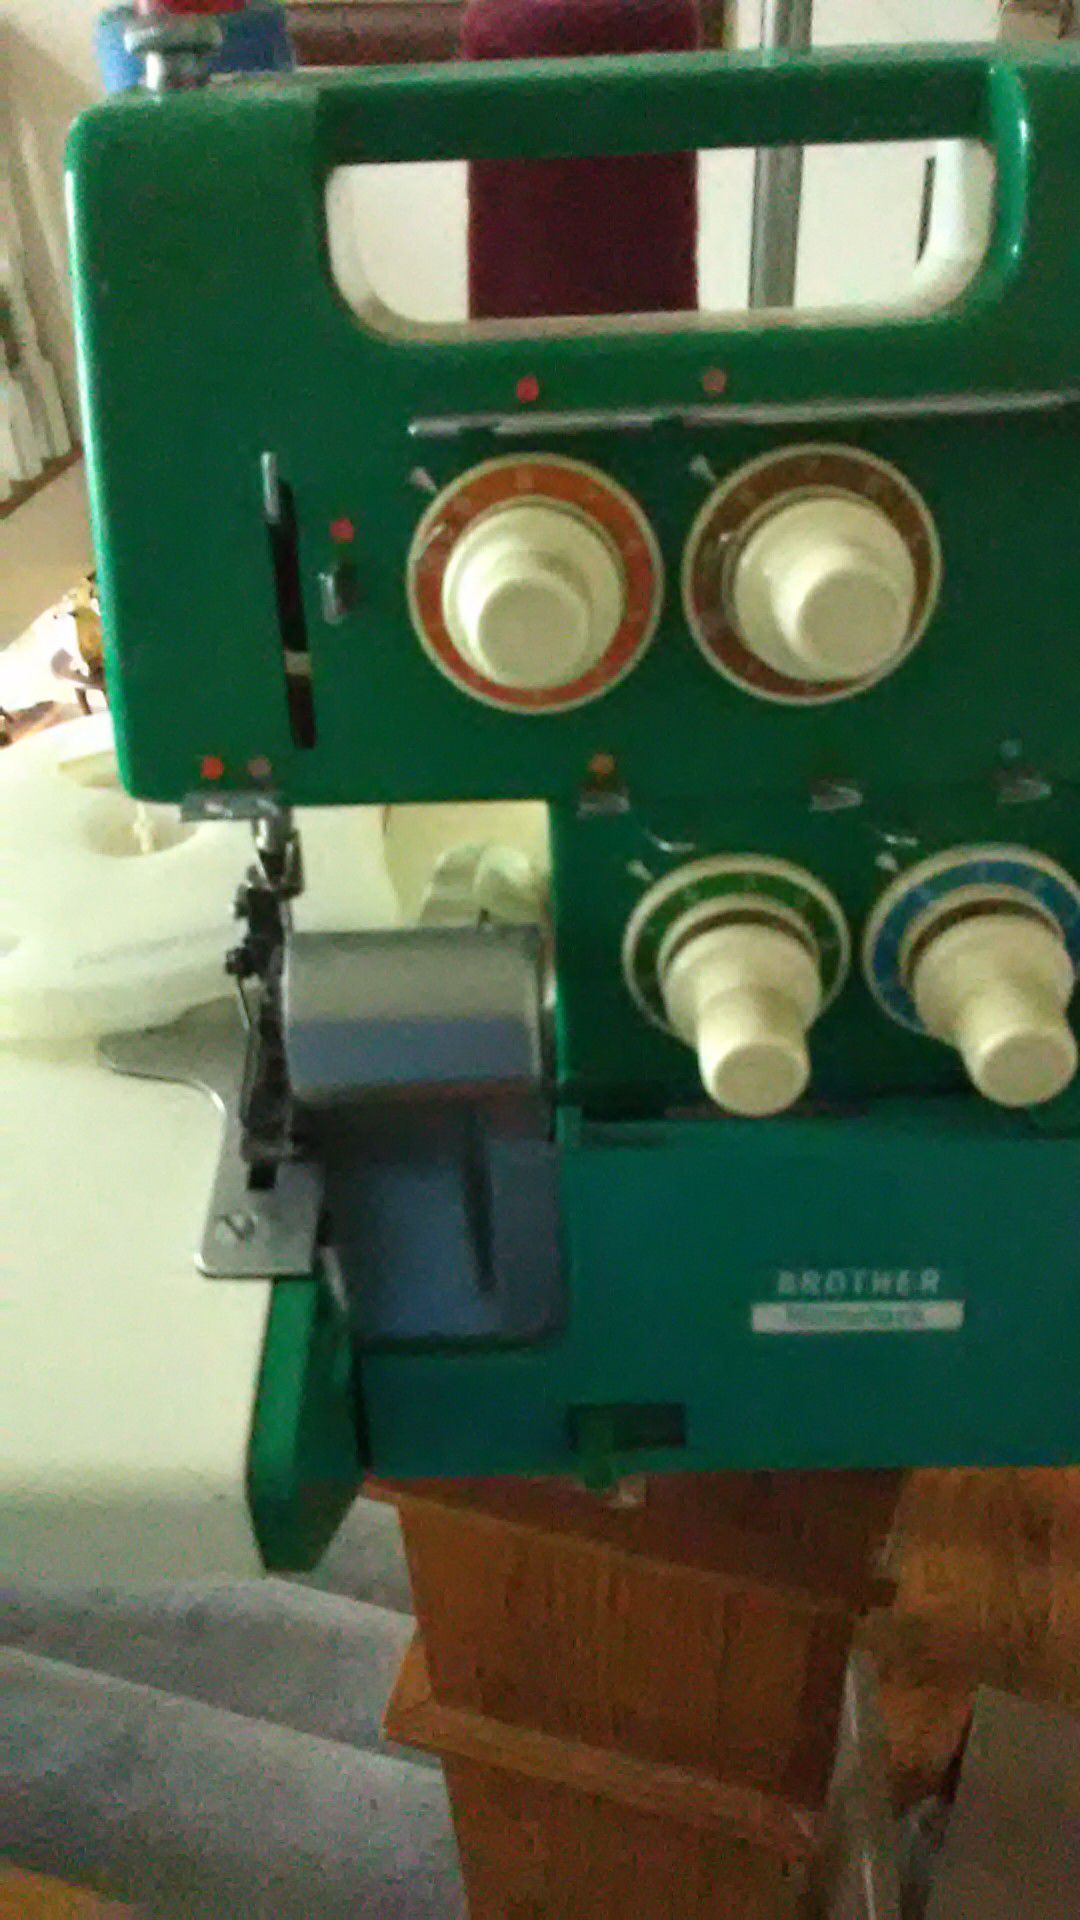 Brother homelock sewing machine